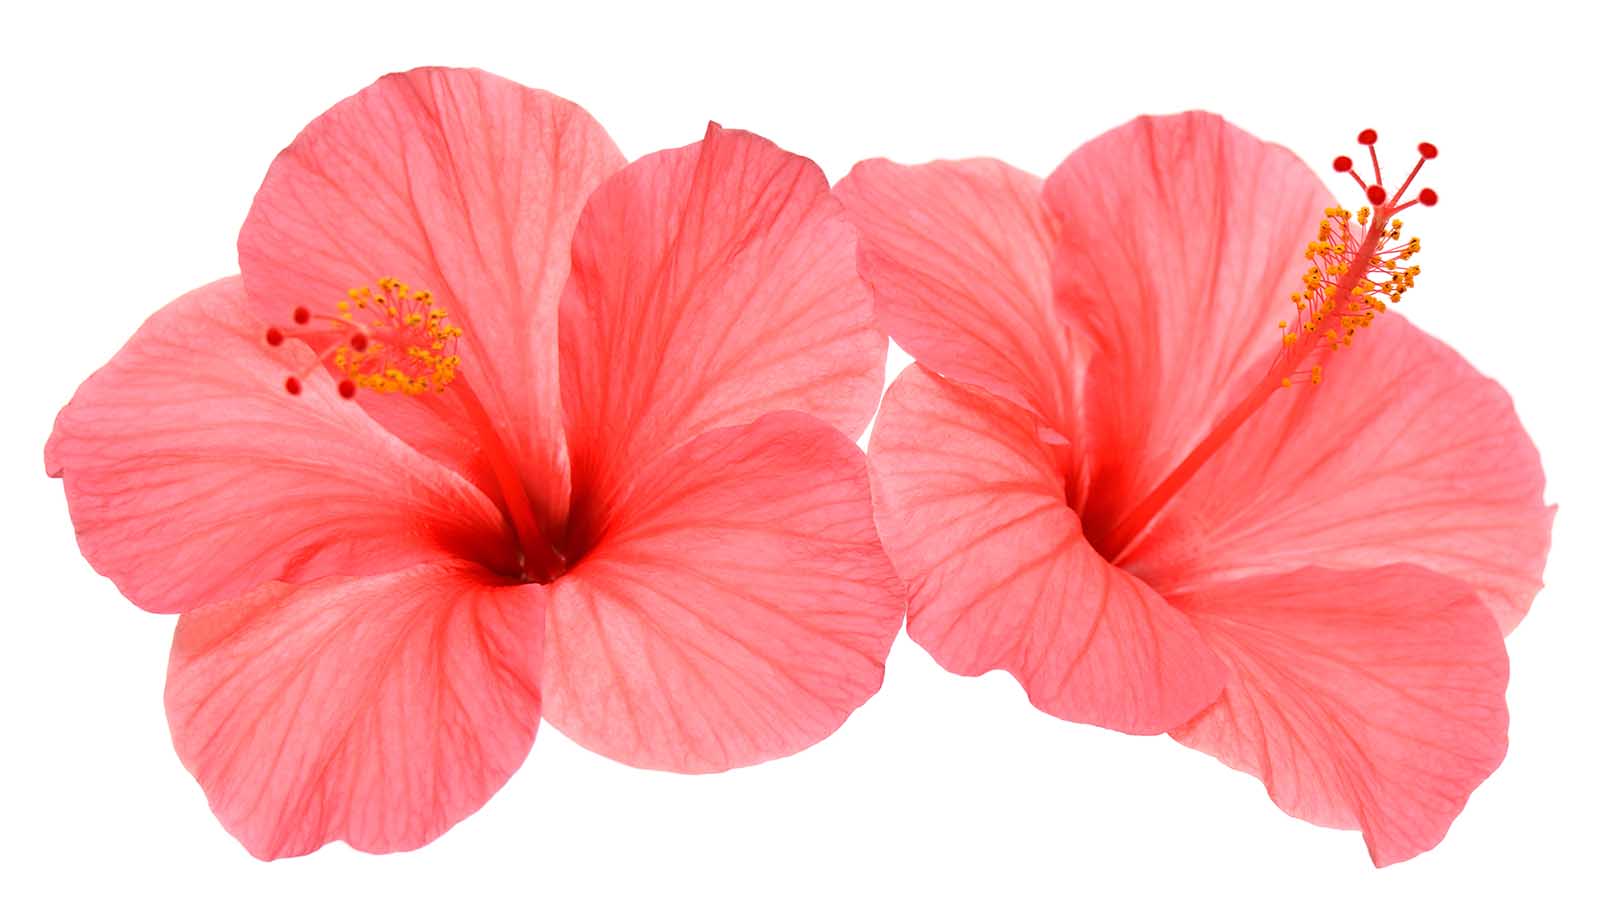 Luxury Hibiscus Oil Benefits For Your